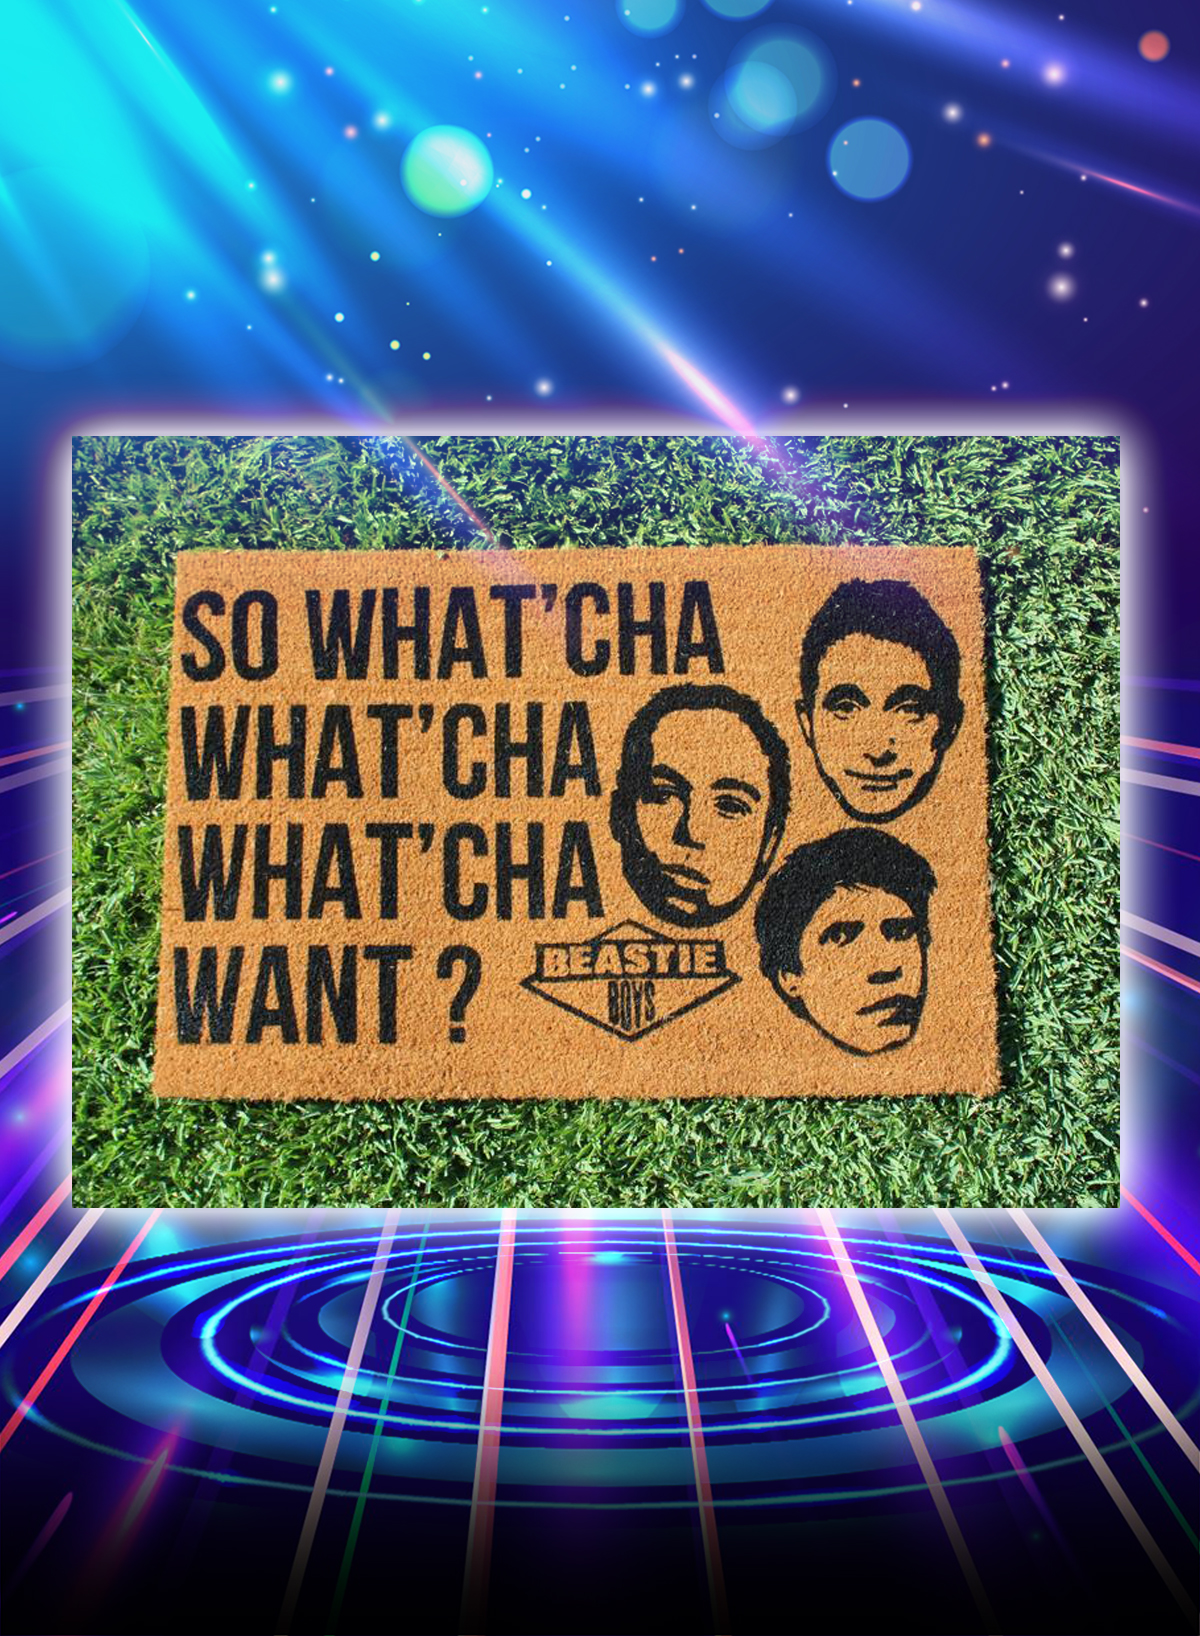 Beastie Boys so what’cha what’cha what’cha want doormat – Saleoff 050121